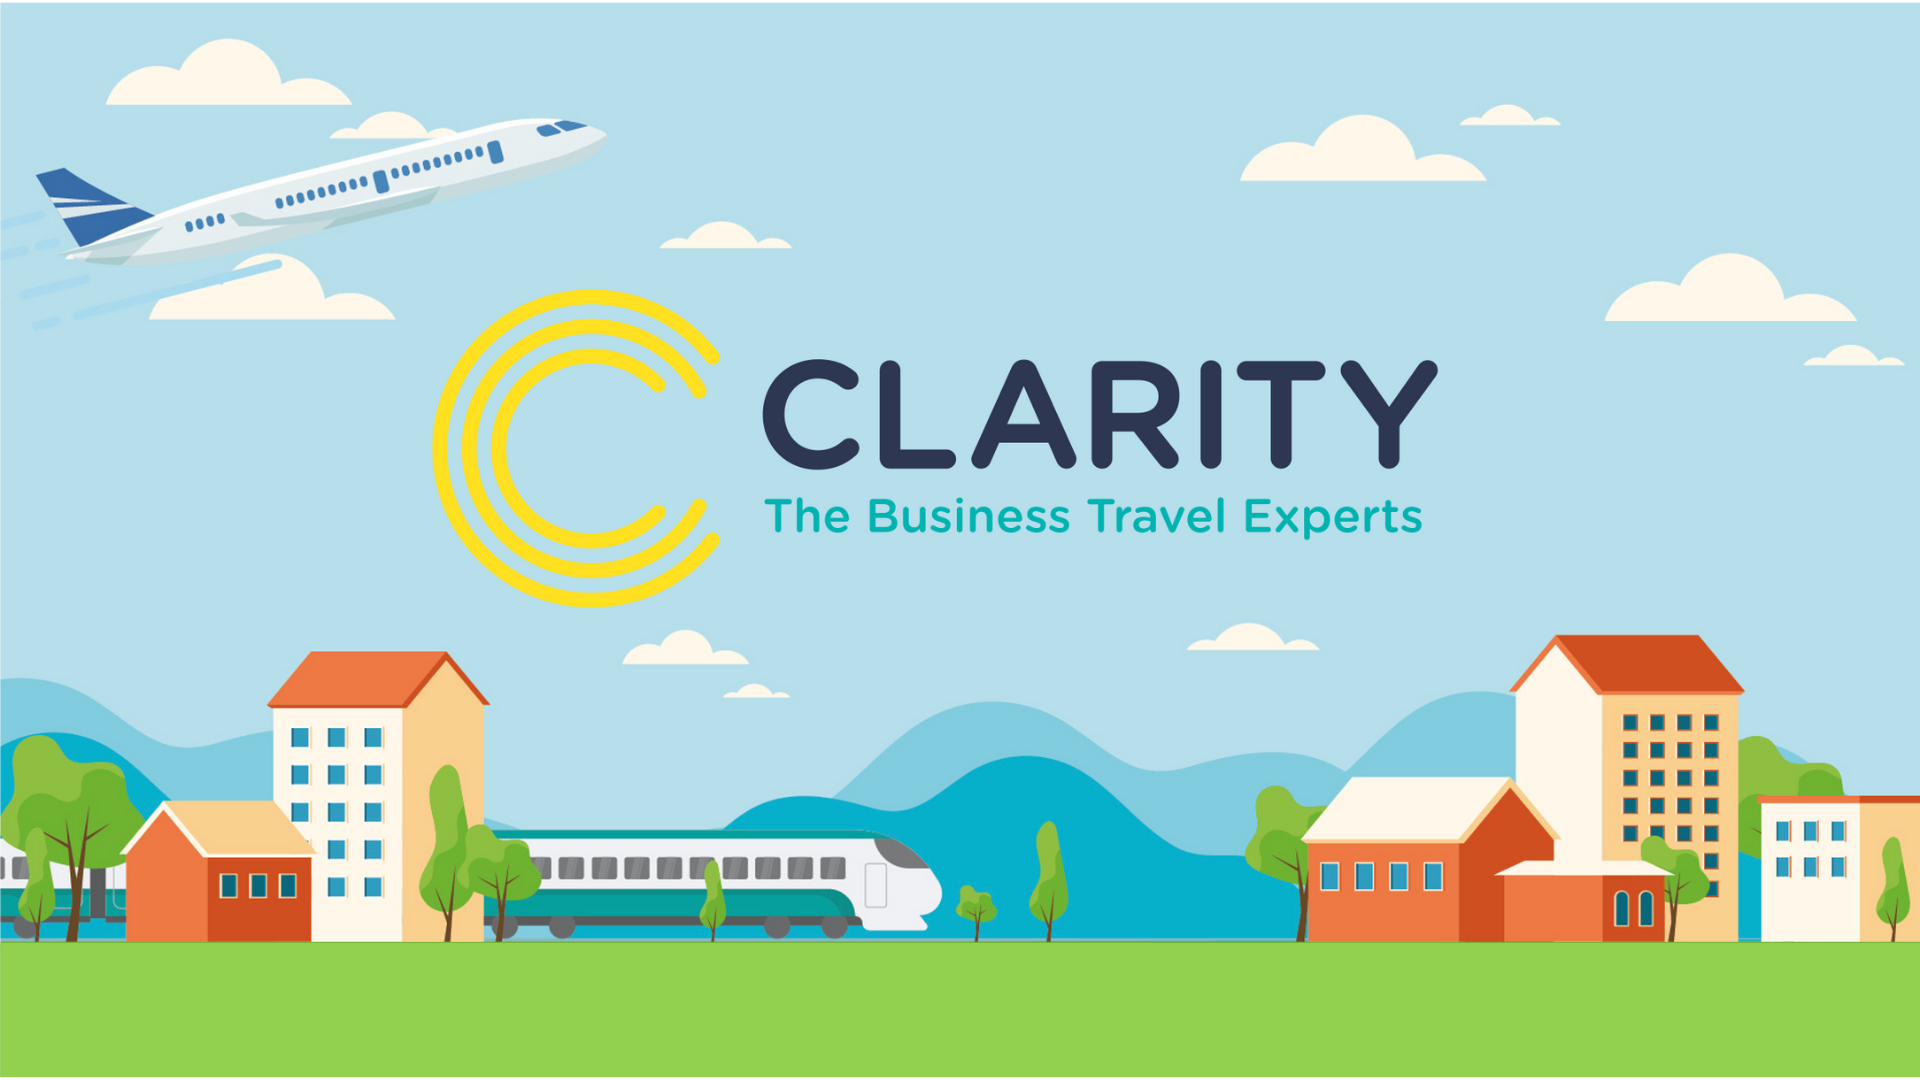 Business Travel is back! But Clarity never left.